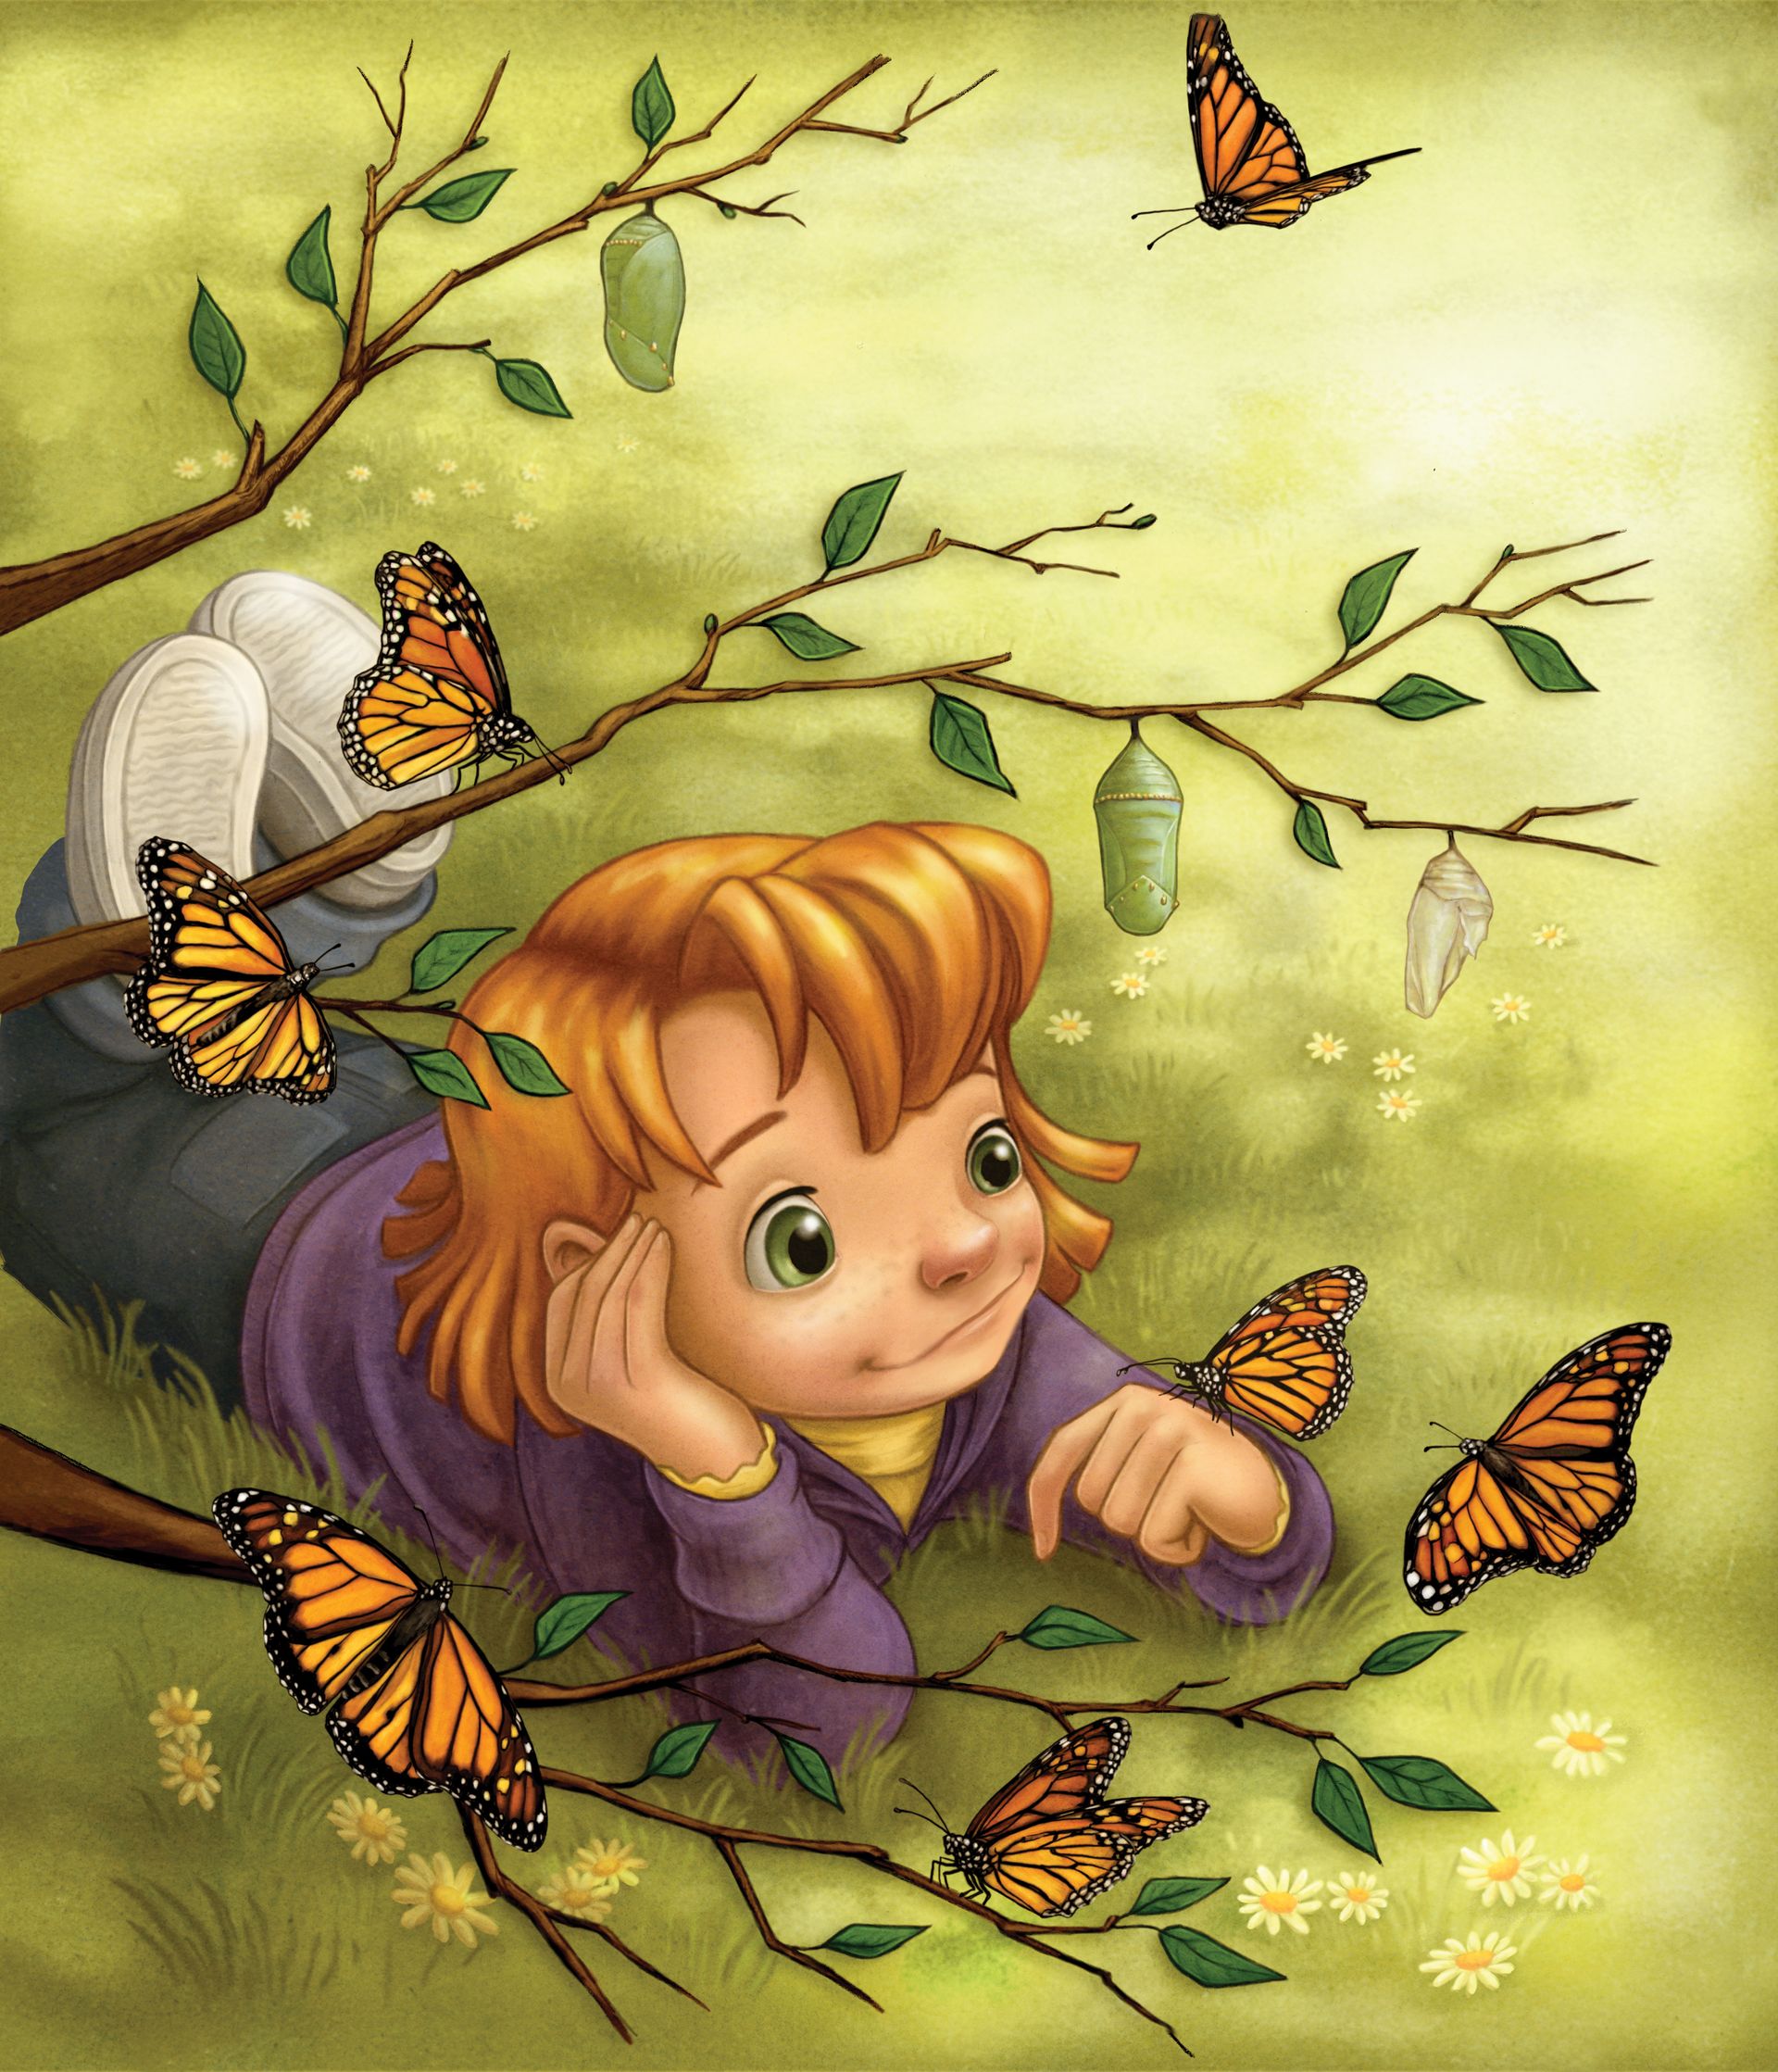 A girl lies in the grass and plays with a butterfly while other butterflies fly around her.